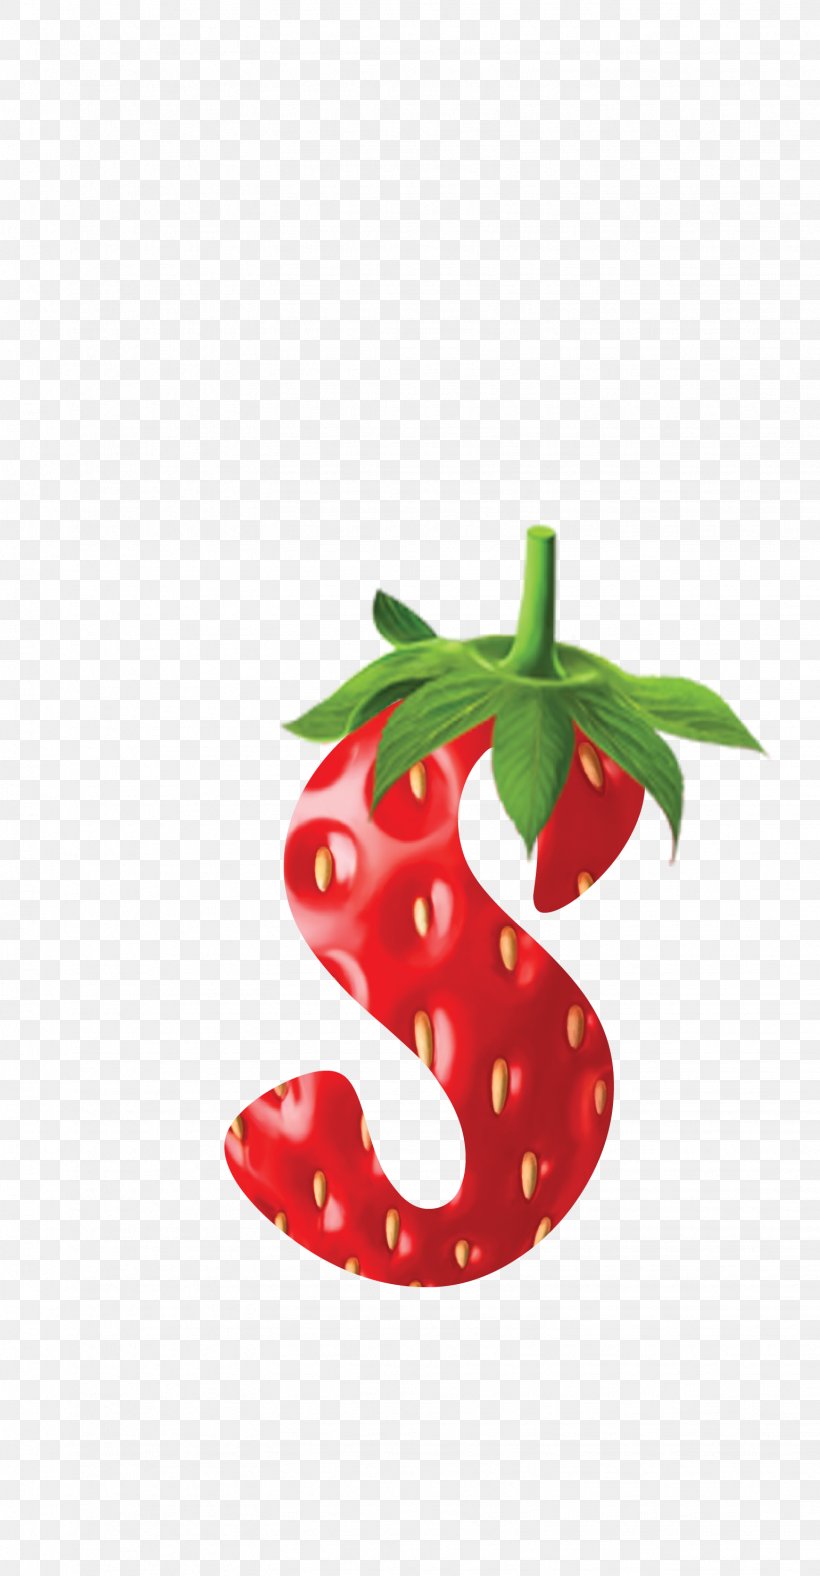 Strawberry Logo Fruit Food Graphic Design, PNG, 1541x2963px, Strawberry, Advertising, Auglis, Bell Pepper, Bell Peppers And Chili Peppers Download Free